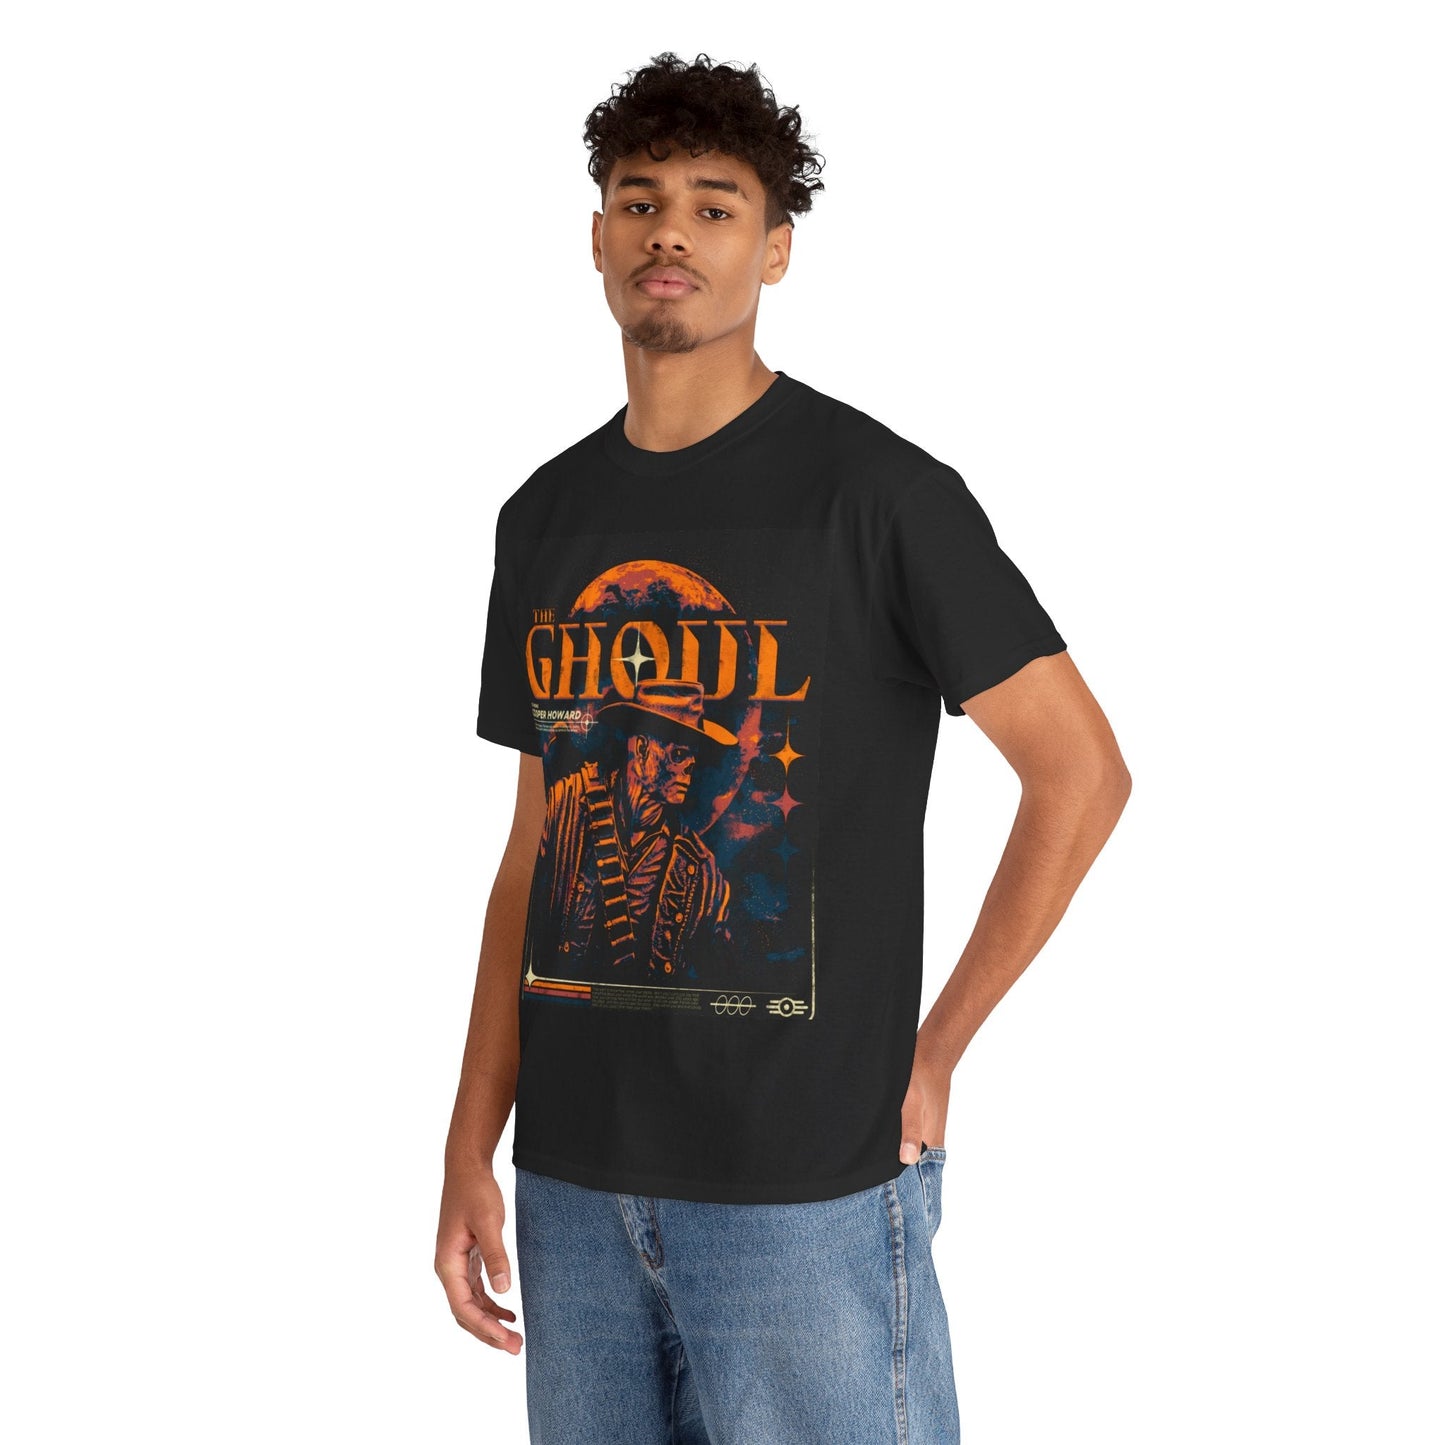 The Ghoul Fallout T-Shirt - RetroTeeShop